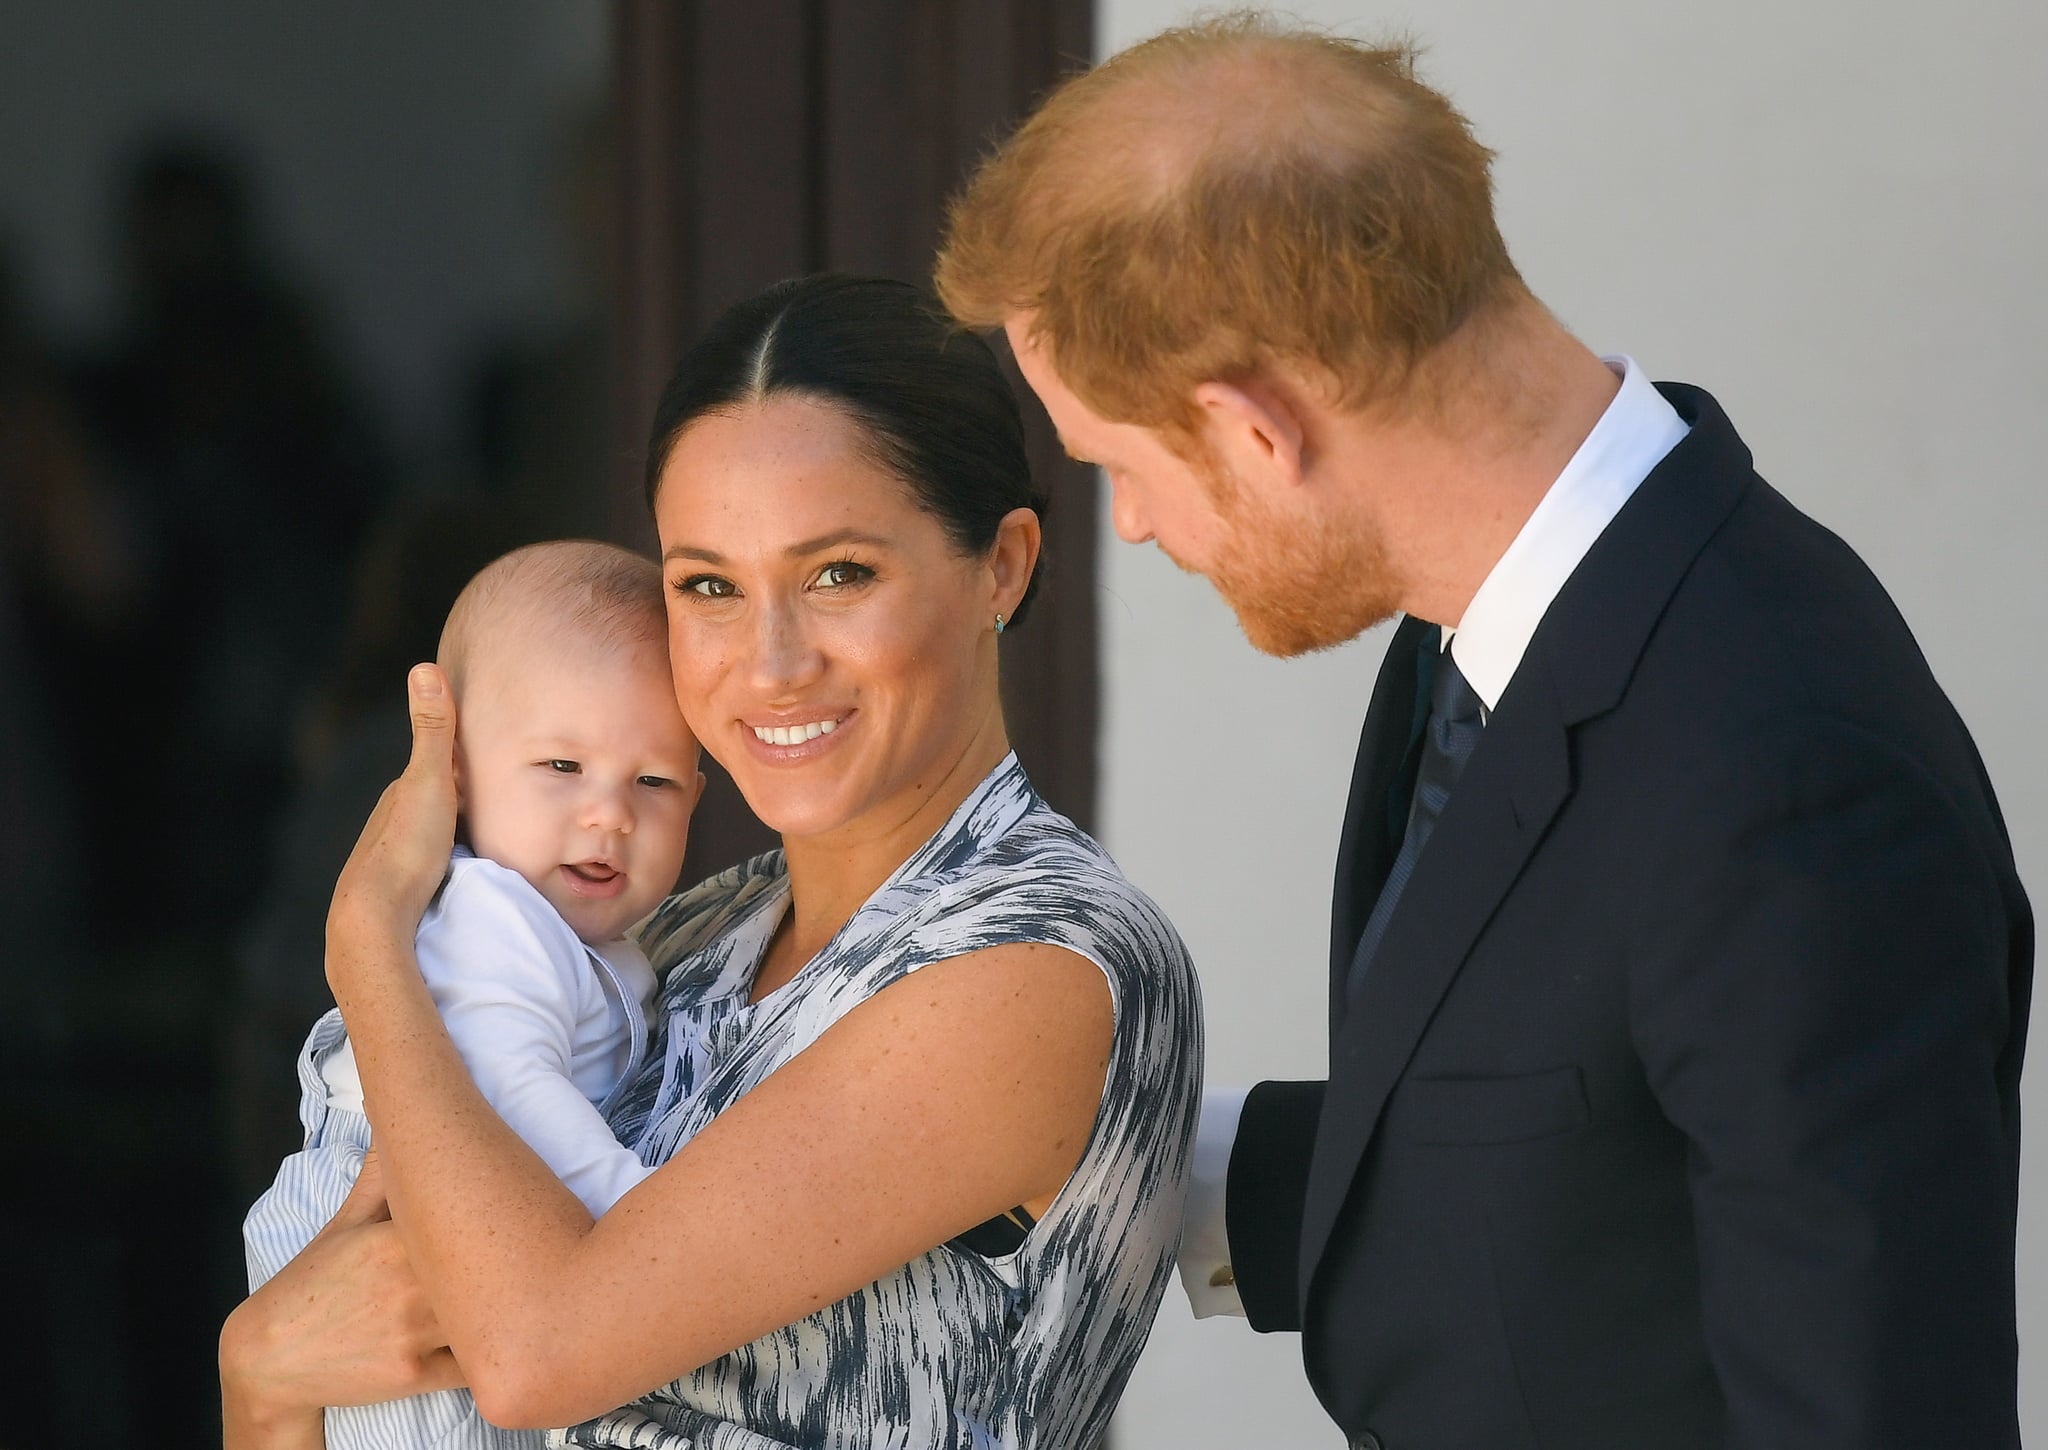 CAPE TOWN, SOUTH AFRICA - SEPTEMBER 25: Prince Harry, Duke of Sussex, Meghan, Duchess of Sussex and their baby son Archie Mountbatten-Windsor meet Archbishop Desmond Tutu and his daughter Thandeka Tutu-Gxashe at the Desmond & Leah Tutu Legacy Foundation during their meeting Royal Tour of South Africa on September 25, 2019 in Cape Town, South Africa.  (Photo by Pool/Samir Hussein/WireImage)